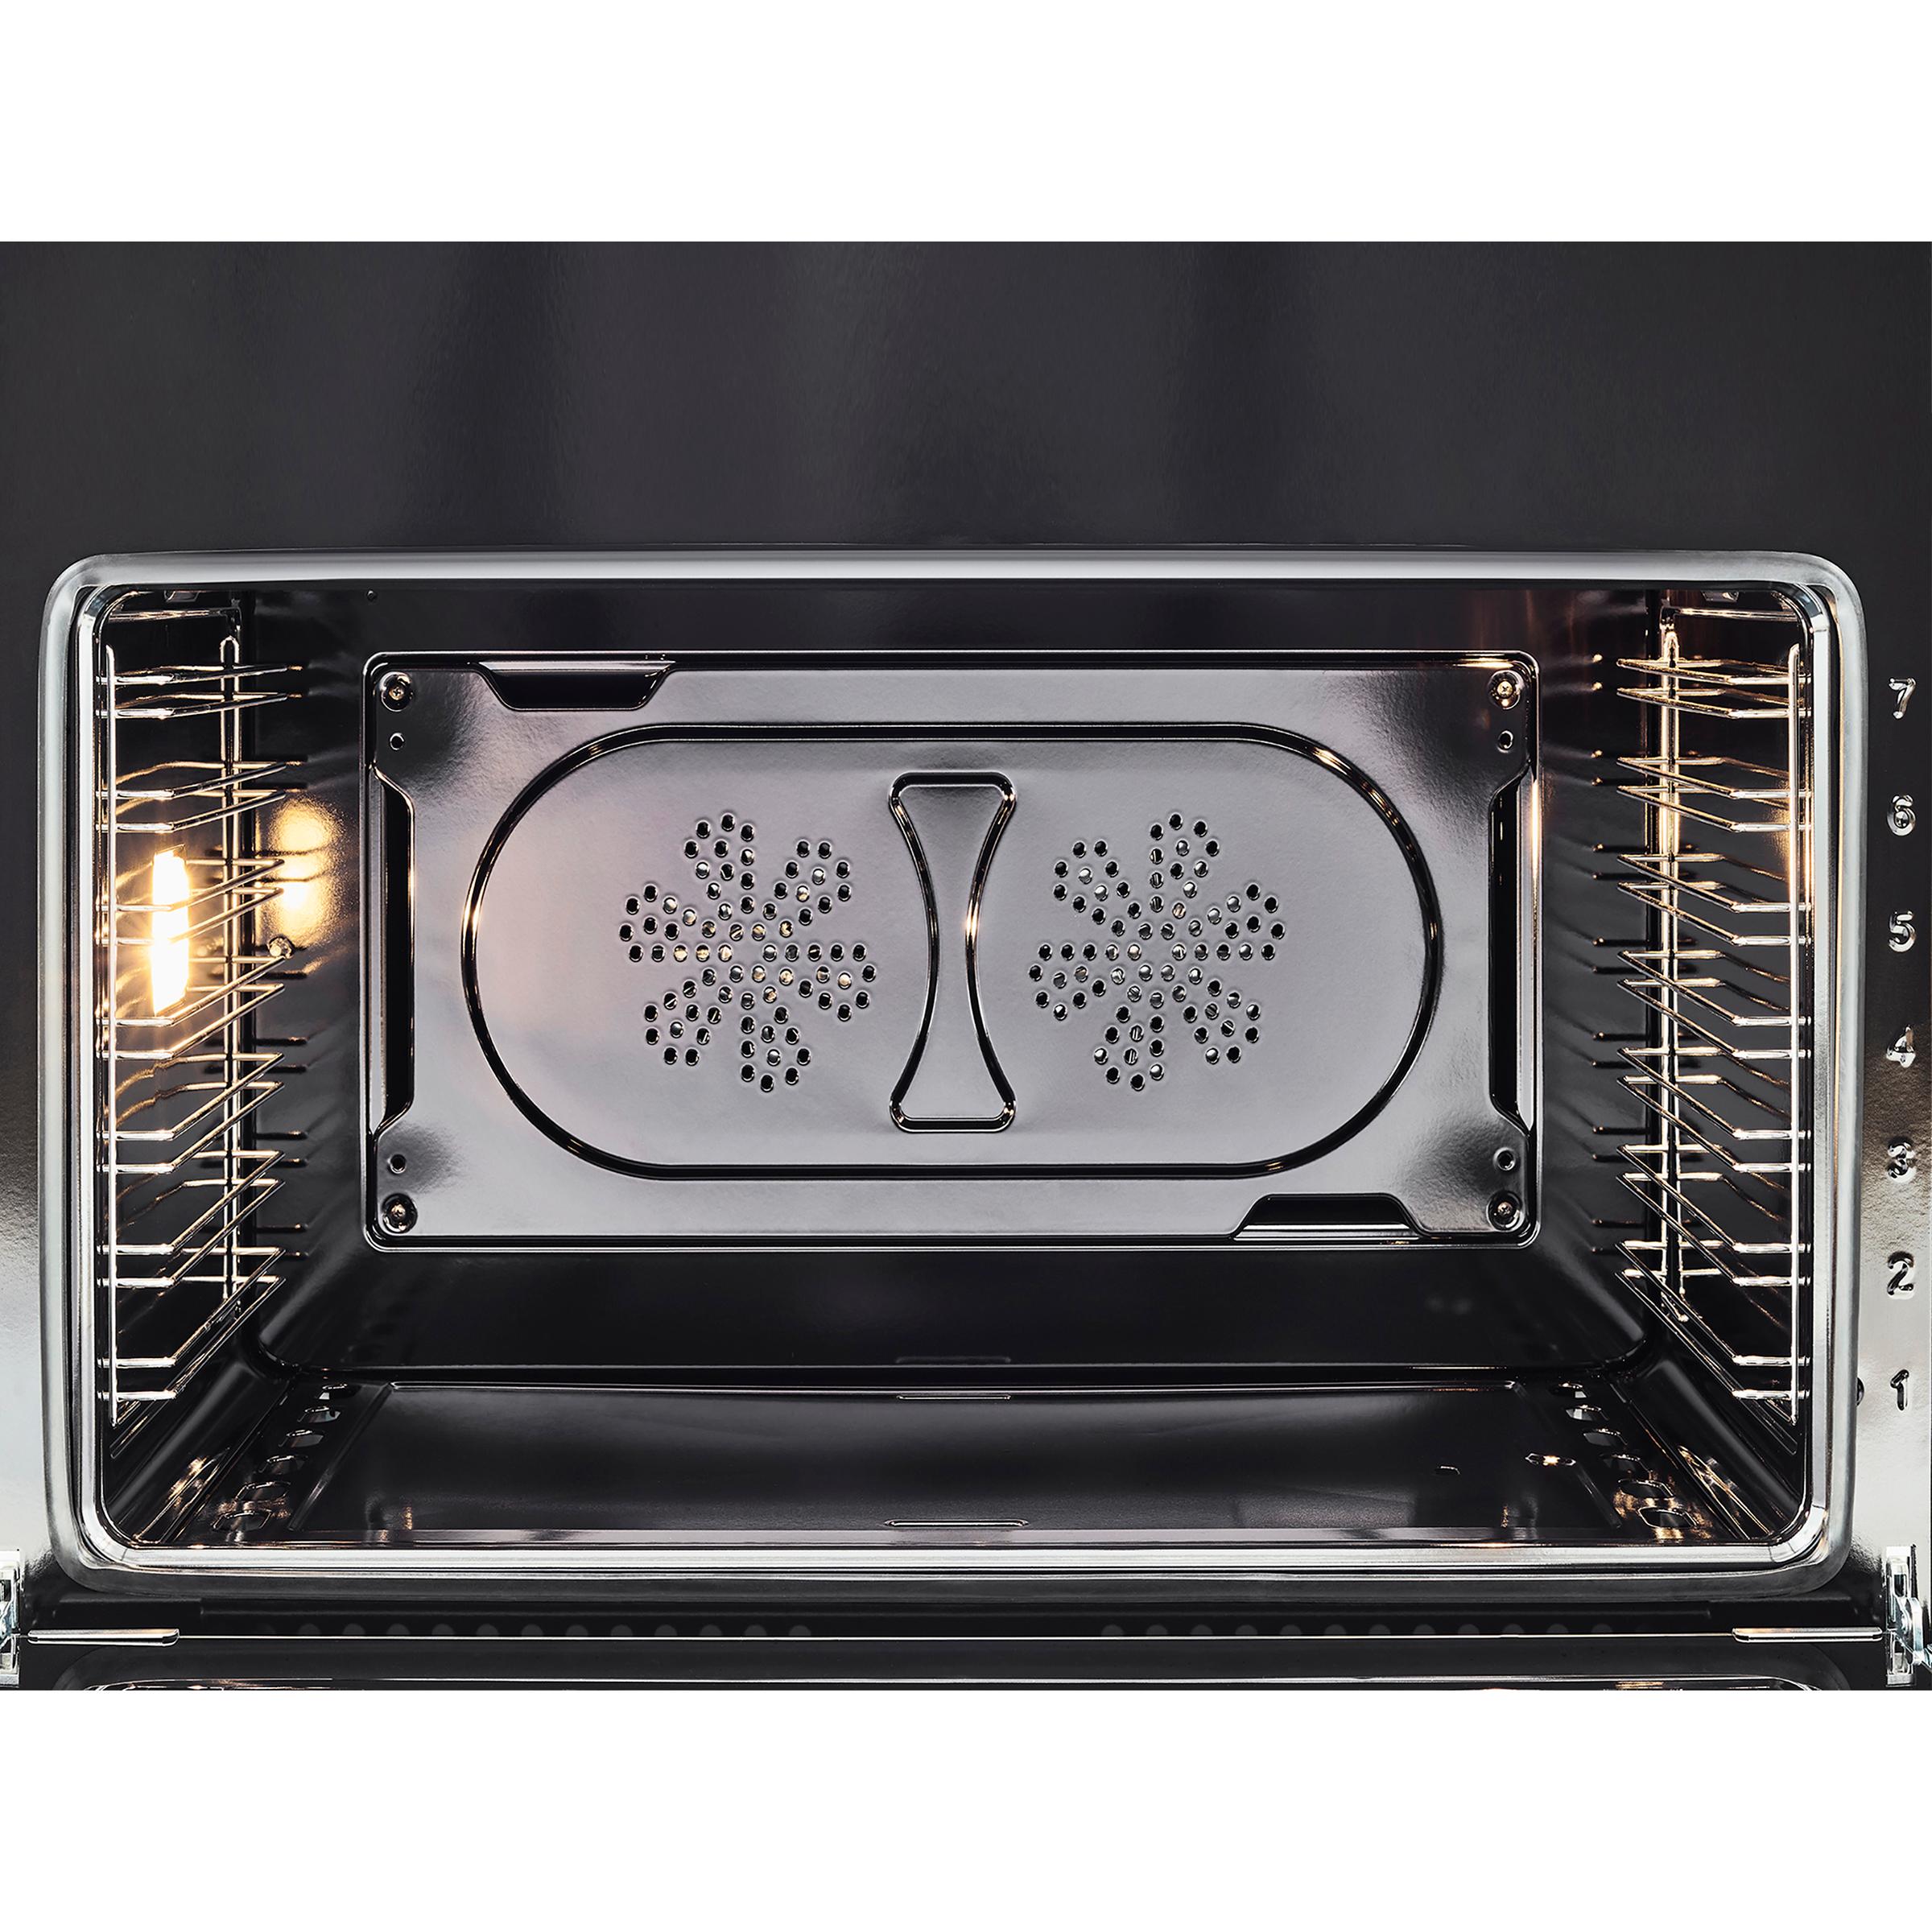 Bertazzoni 36-inch Freestanding Electric Induction Range with Convection Technology MAST365INMXE